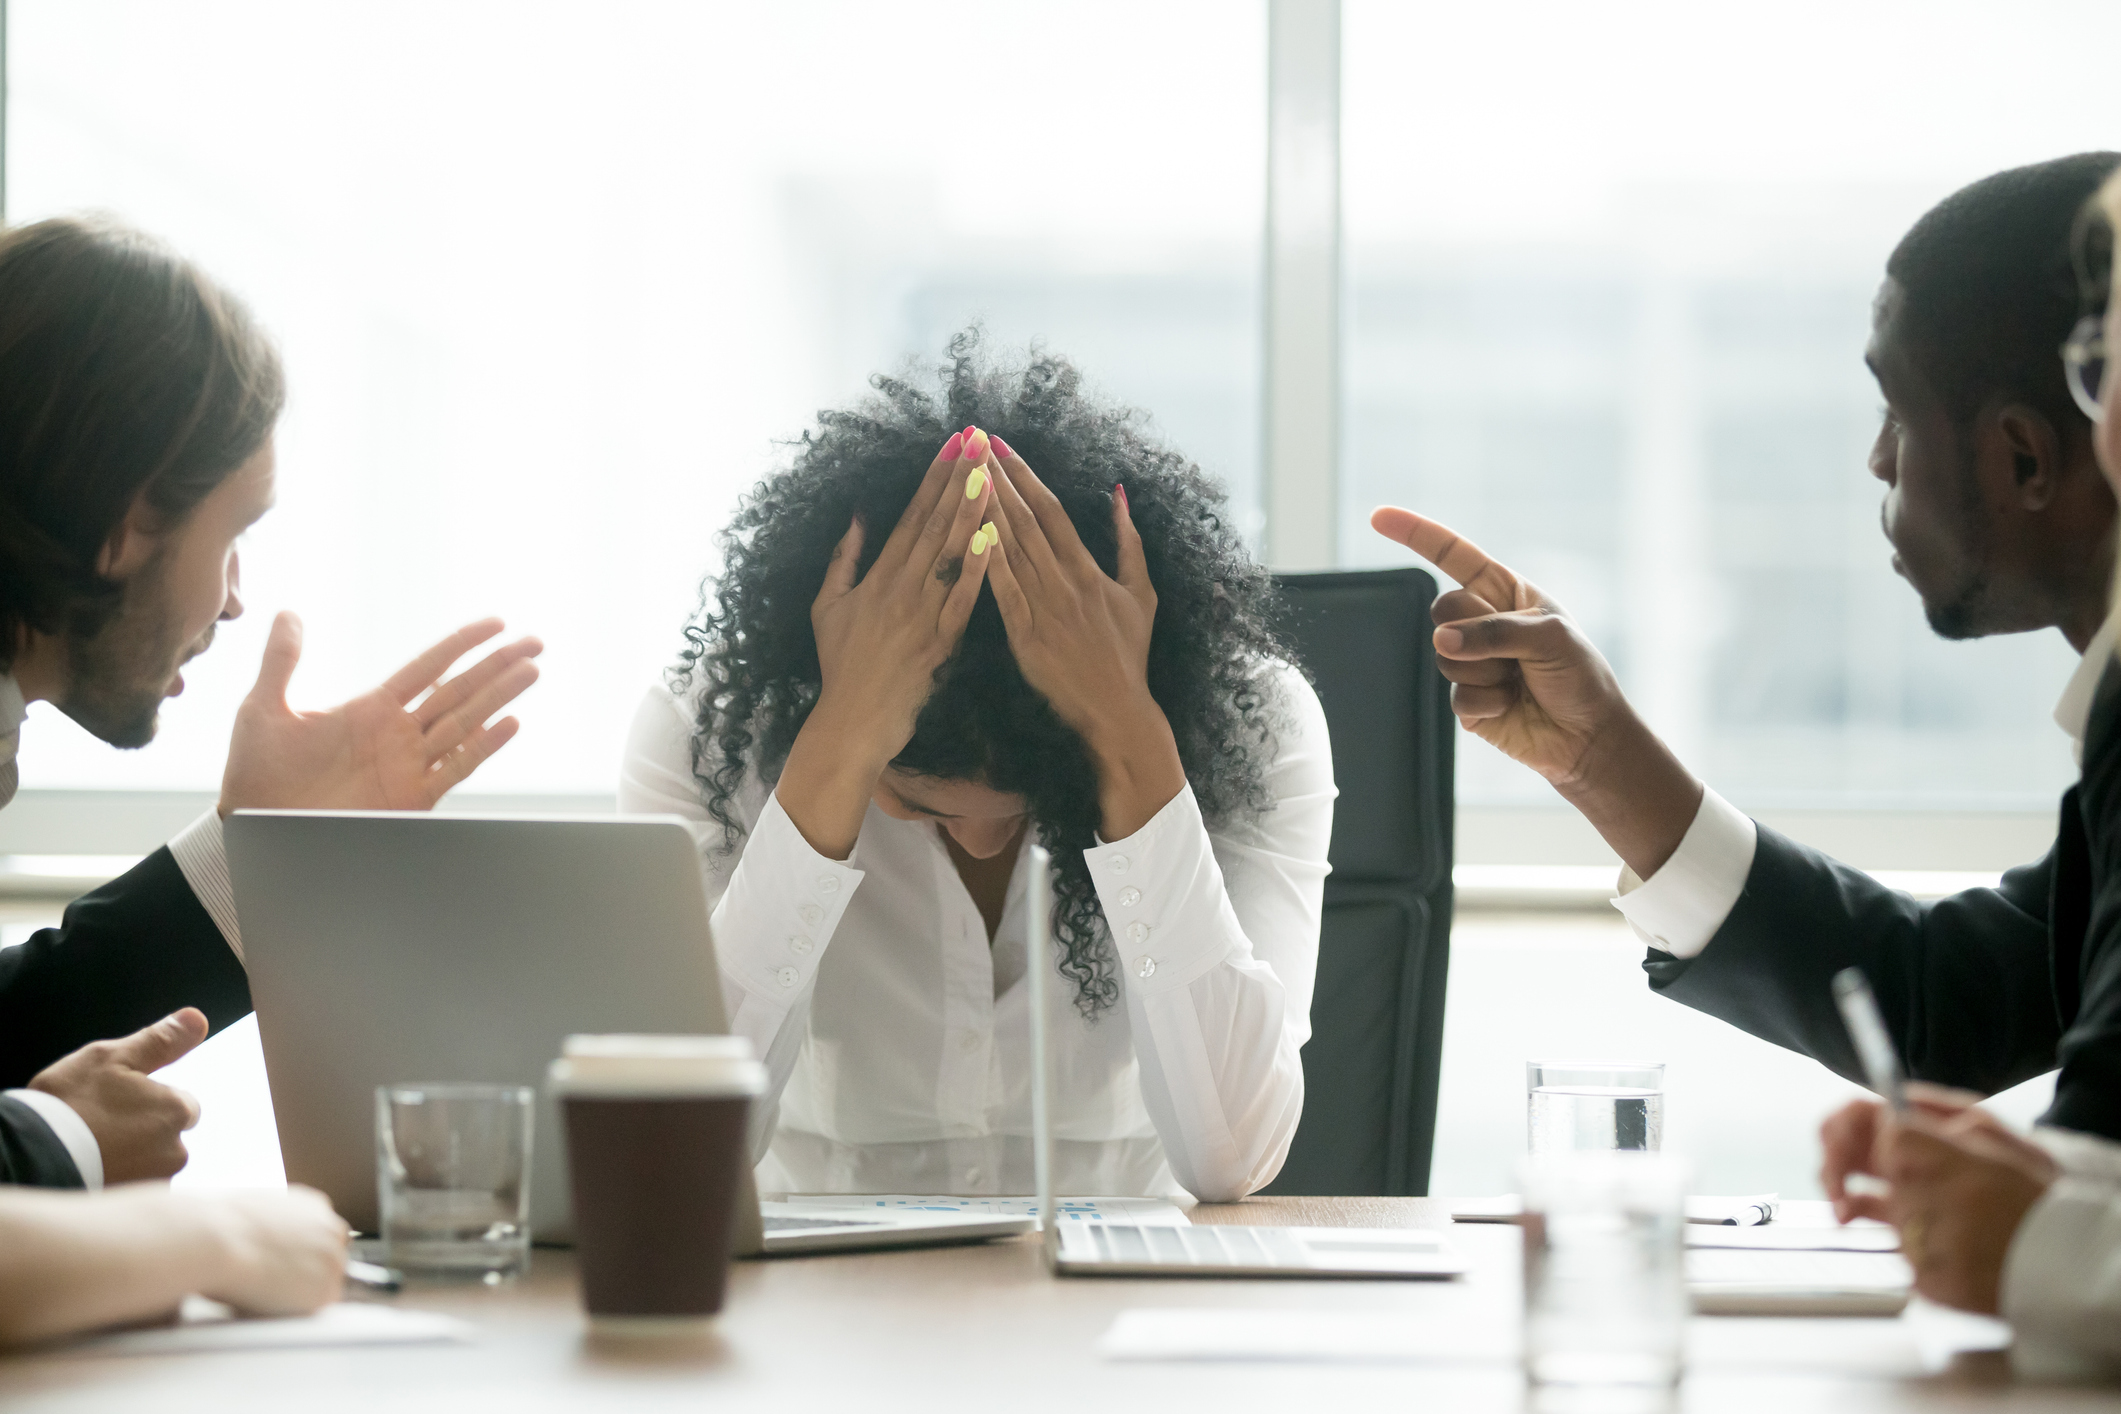 Stock Photo of a Woman Sitting at a Conference Table with Her Head in Her Hands and Two Men on Either Side of Her Pointing At Her and Appearing To Yell